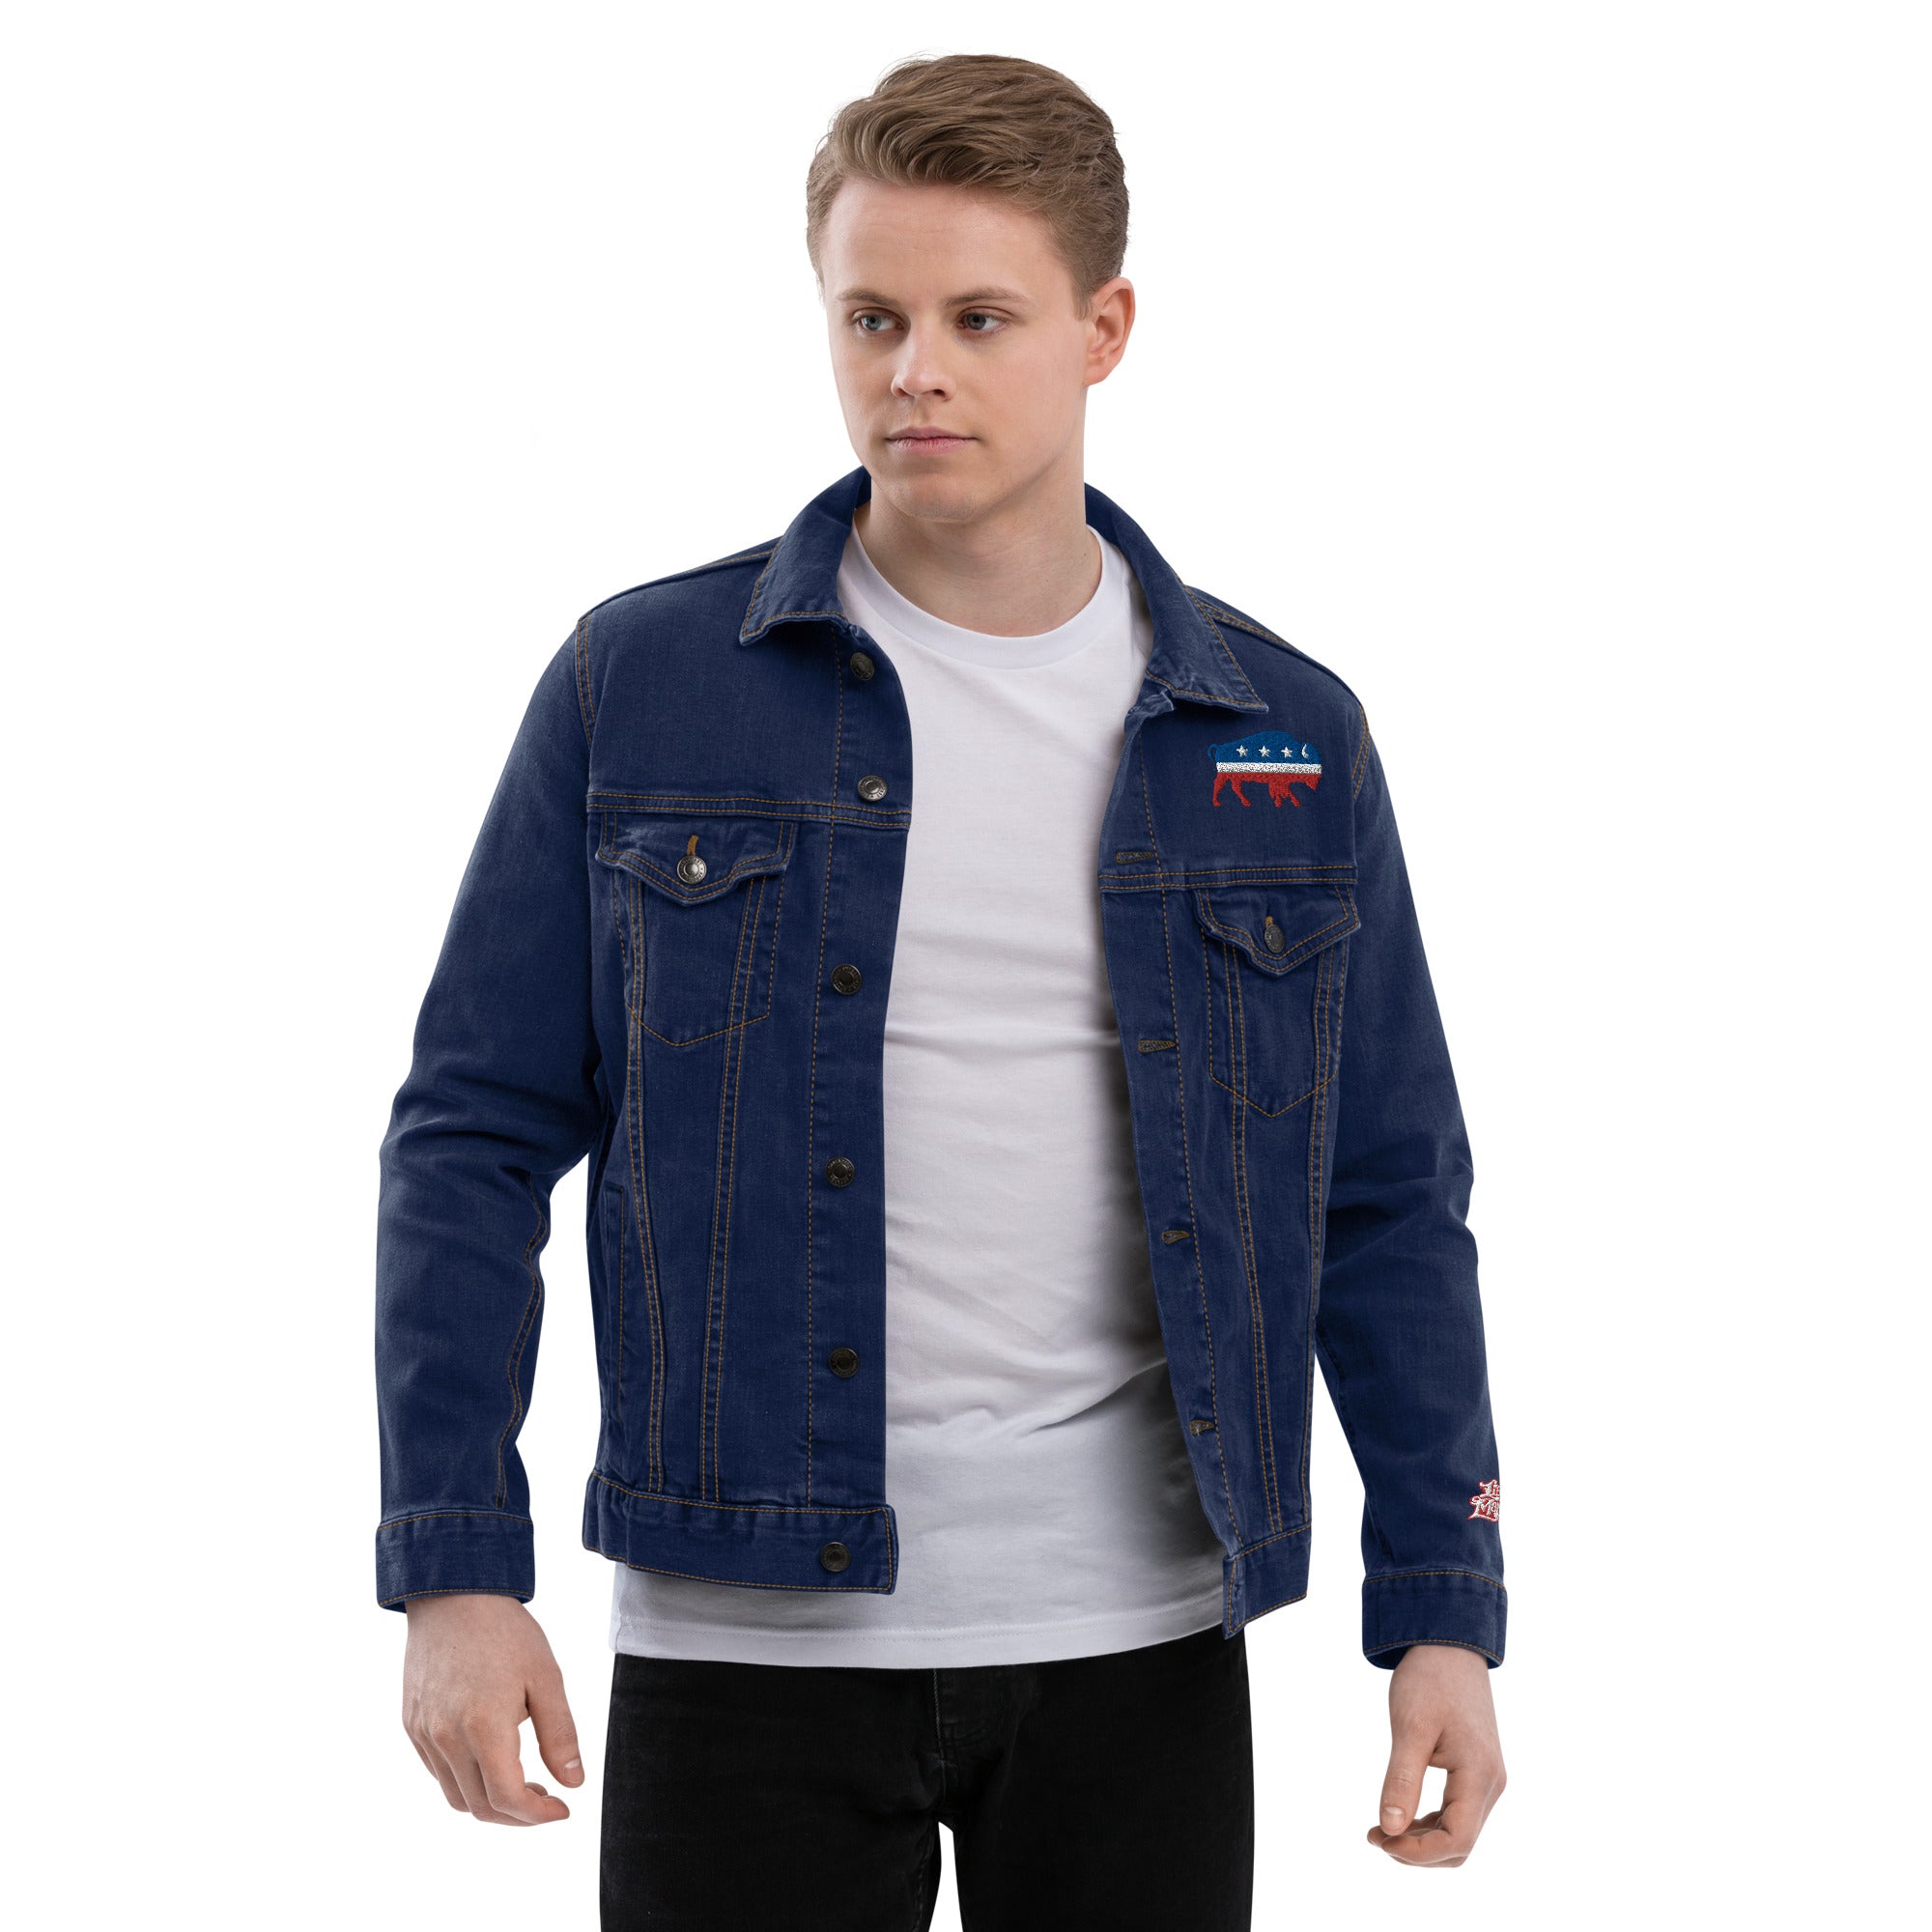 Independent Liberty Maniacs Embroidered Denim Jacket